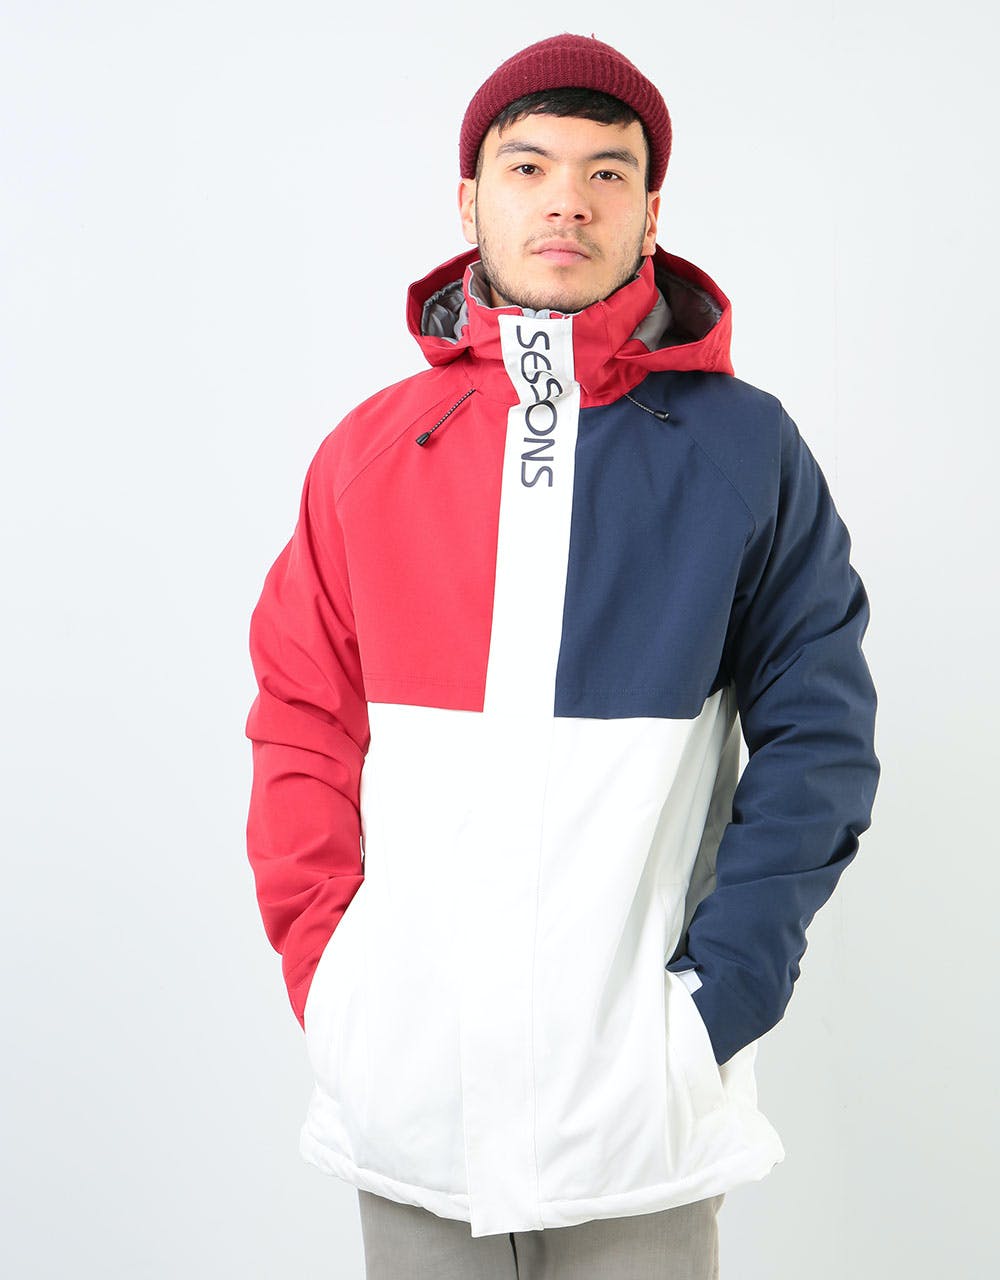 Sessions Podium 2020 Snowboard Jacket - Deep Red